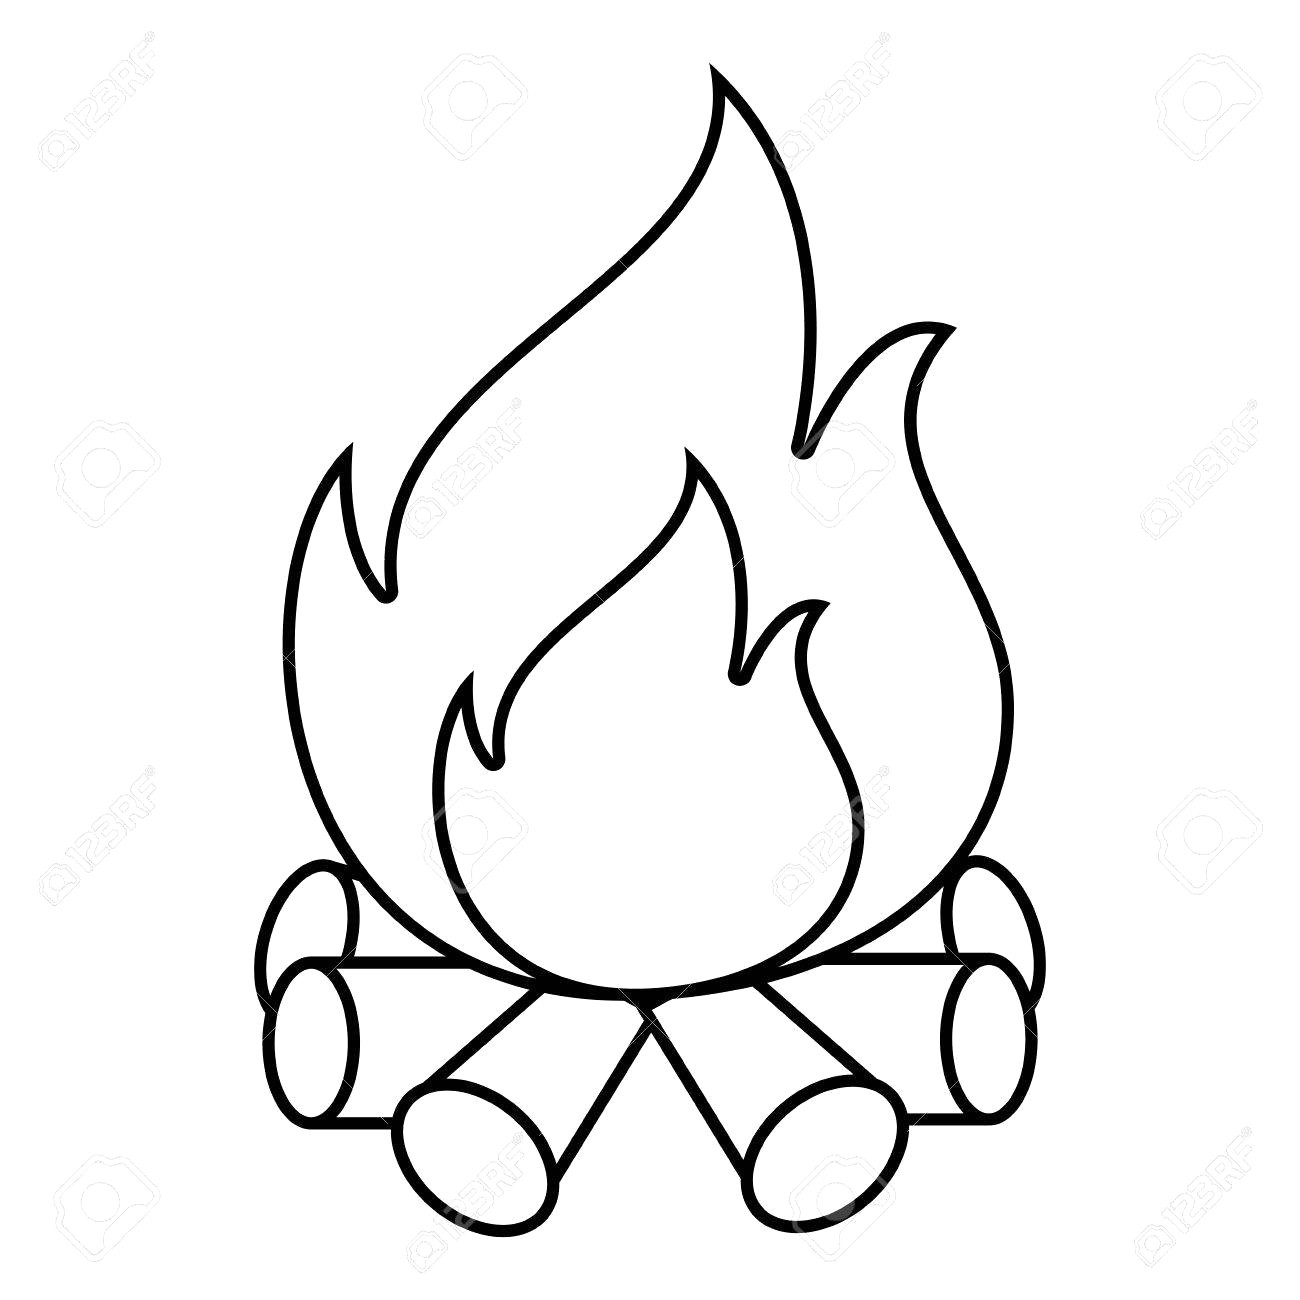 Flames outline drawing.